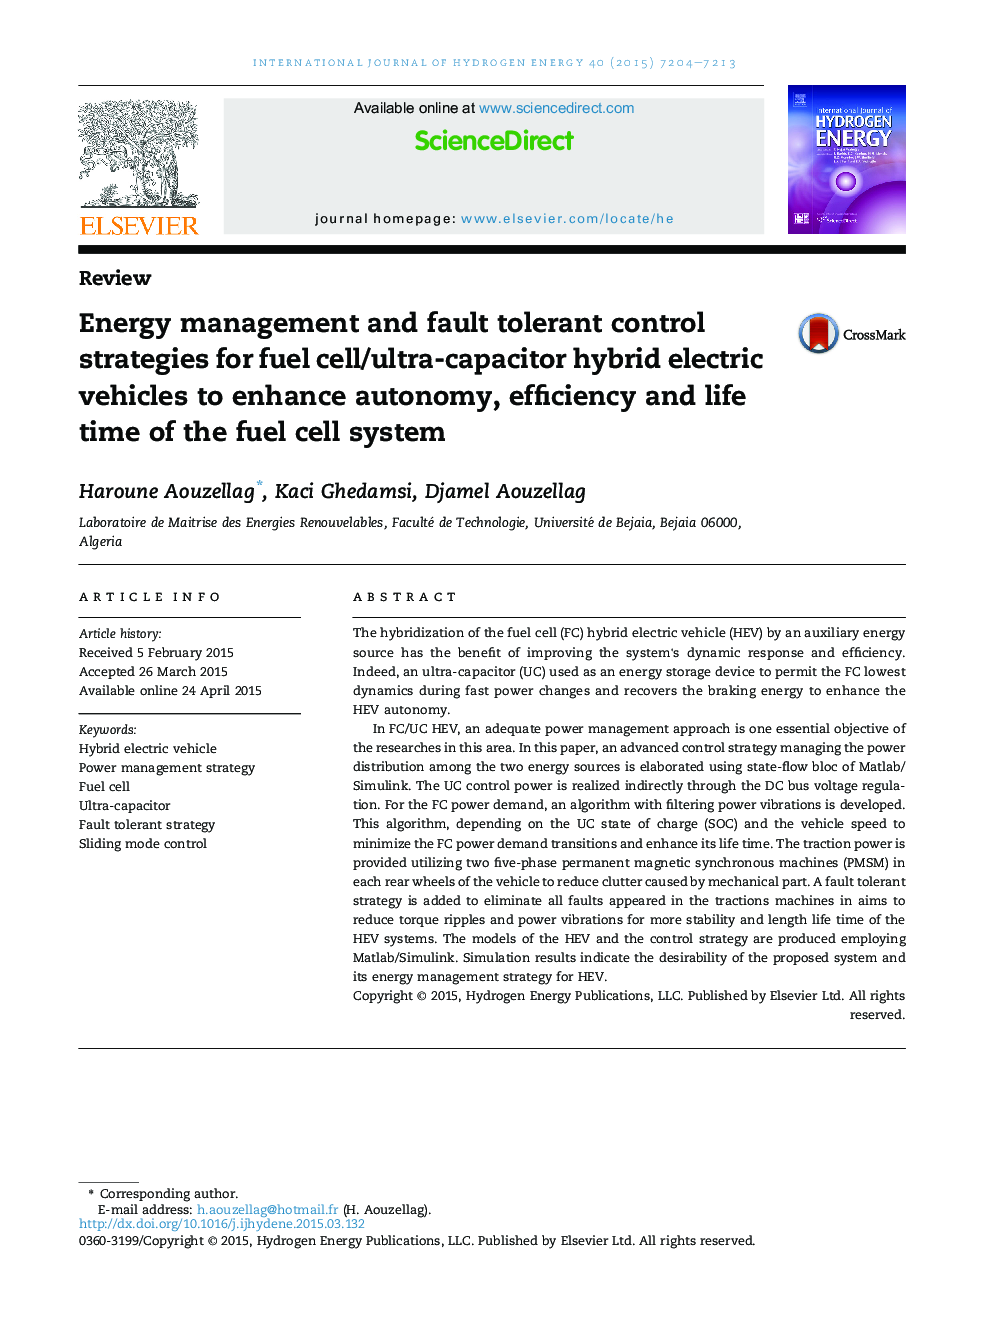 Energy management and fault tolerant control strategies for fuel cell/ultra-capacitor hybrid electric vehicles to enhance autonomy, efficiency and life time of the fuel cell system